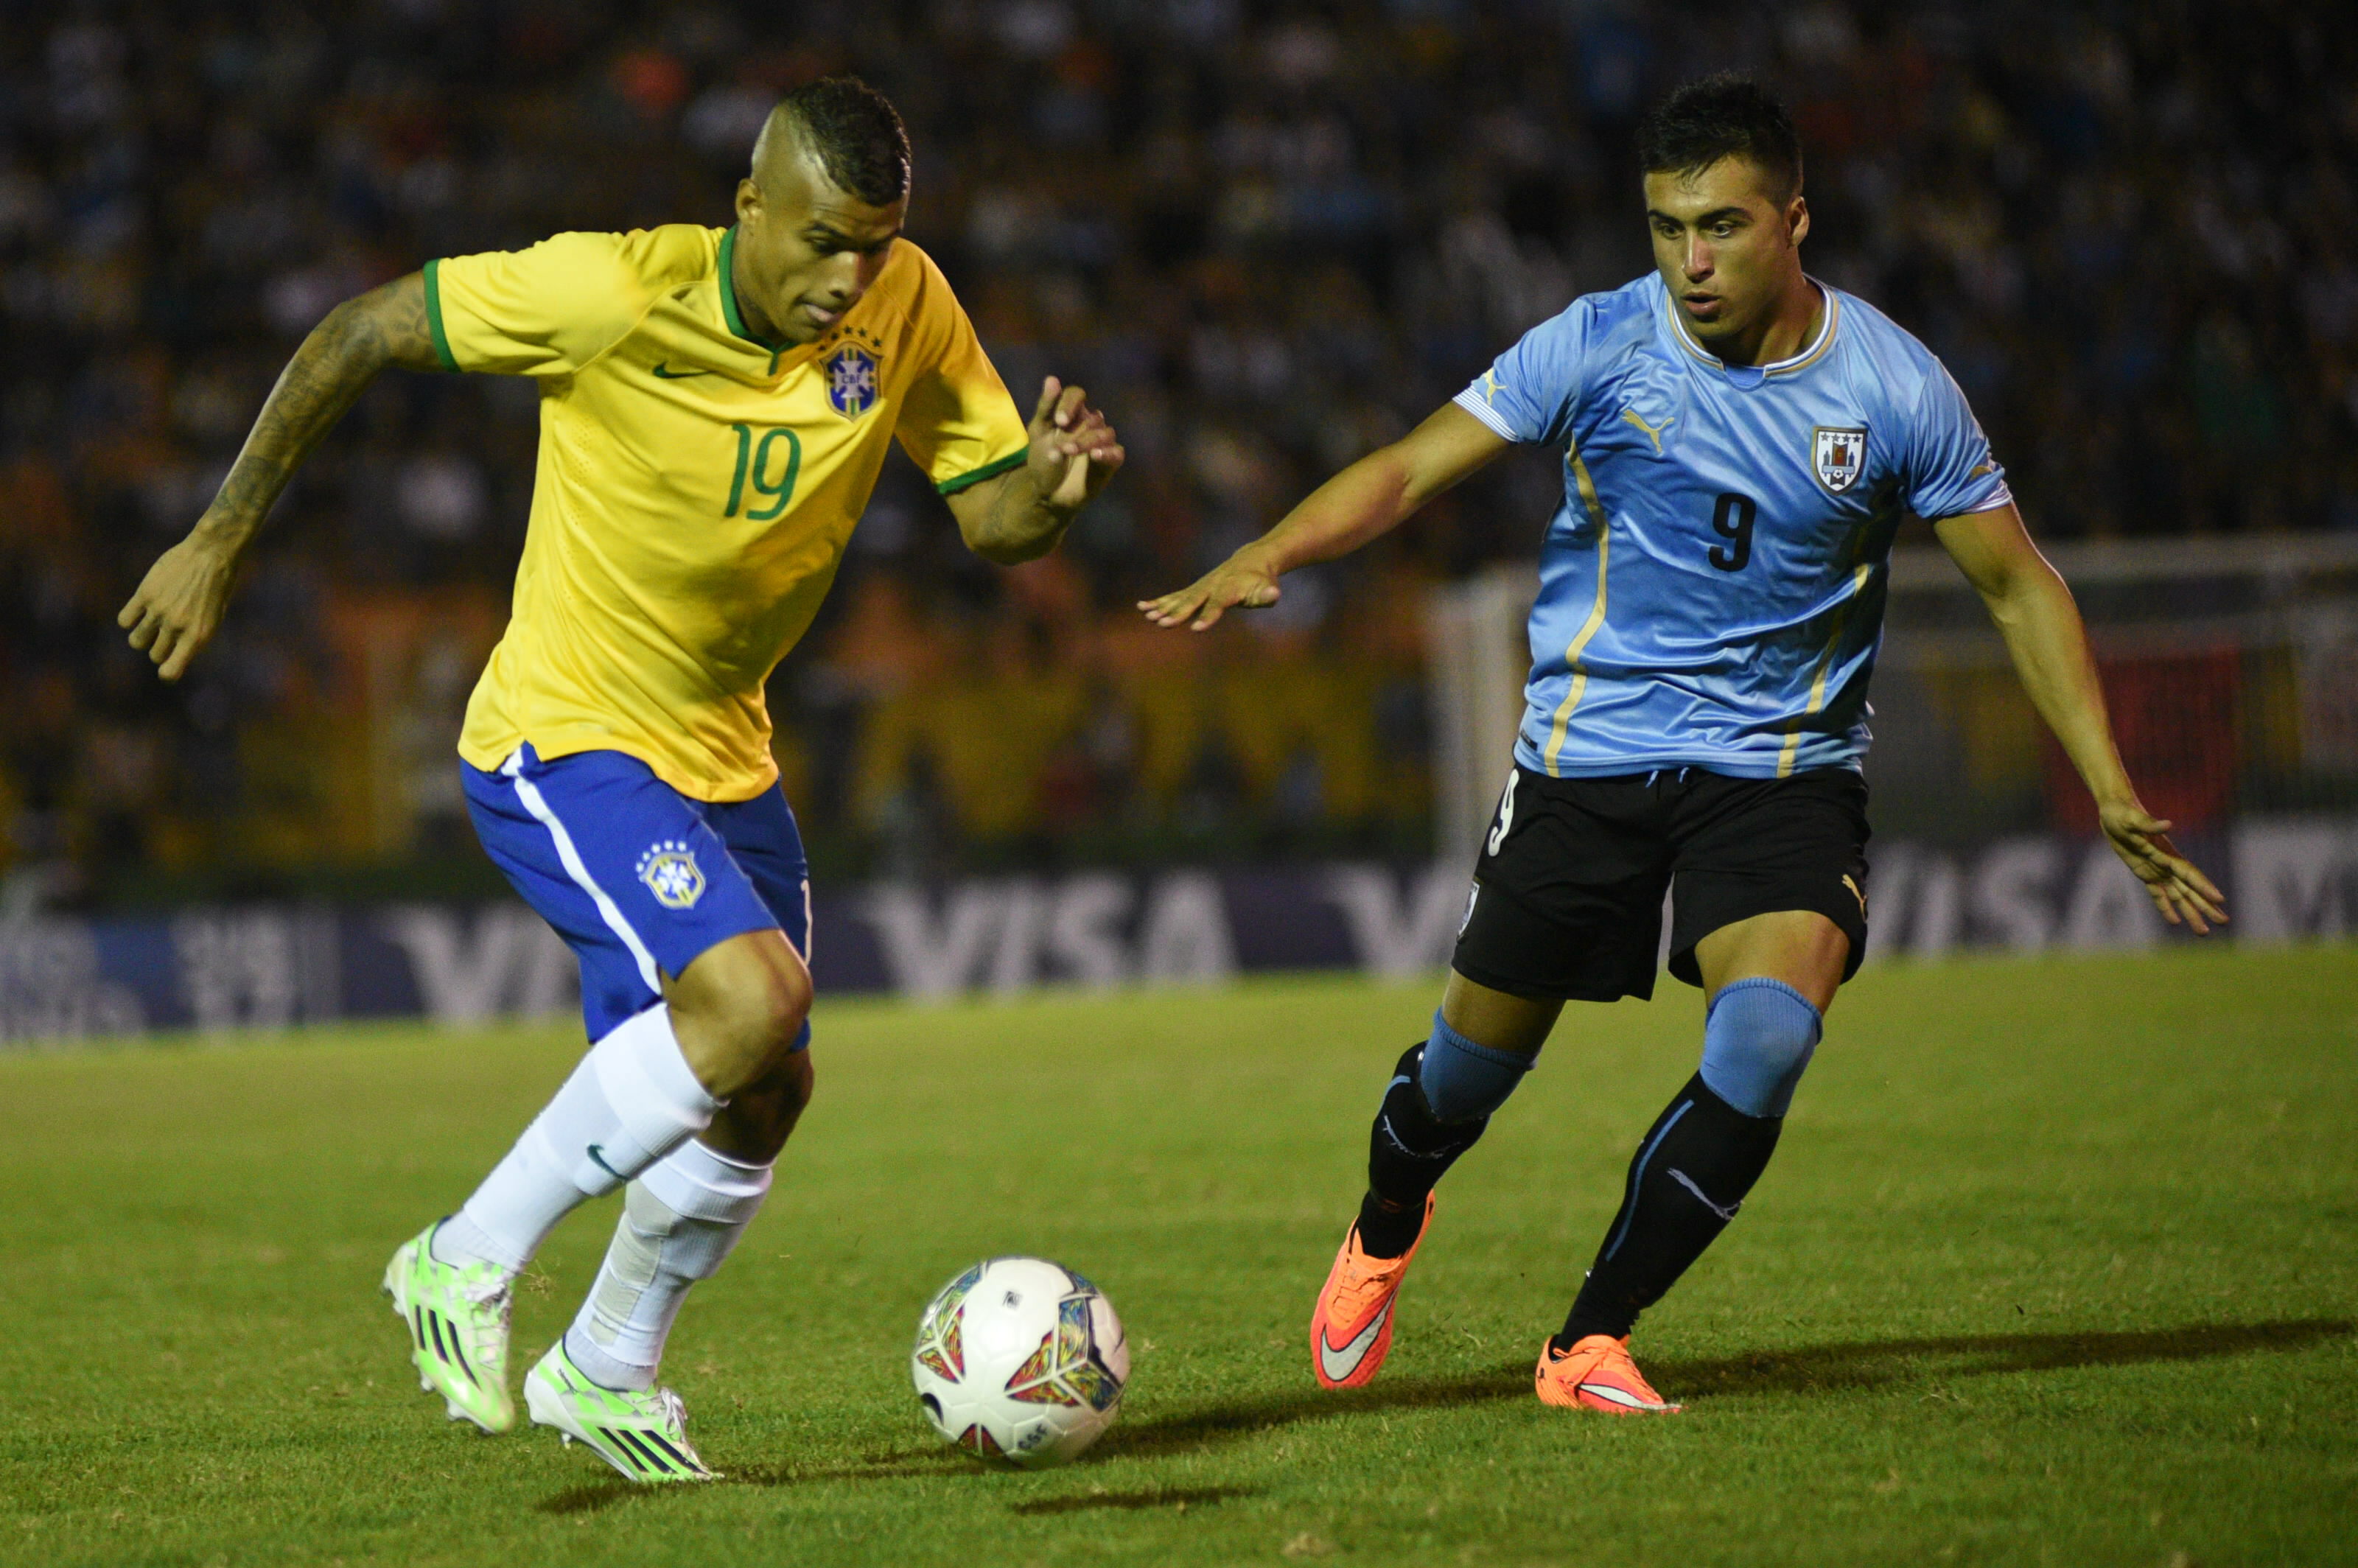 epa04565928 Uruguay's Jaime Baez (R) vies for the ball against Kenedy (L) of Brazil during a soccer match as part of South American Under 20 championship at the Domingo Burgueno Miguel stadium in Maldonado, Uruguay, 17 January 2015.  EPA/Carlos Lebrato